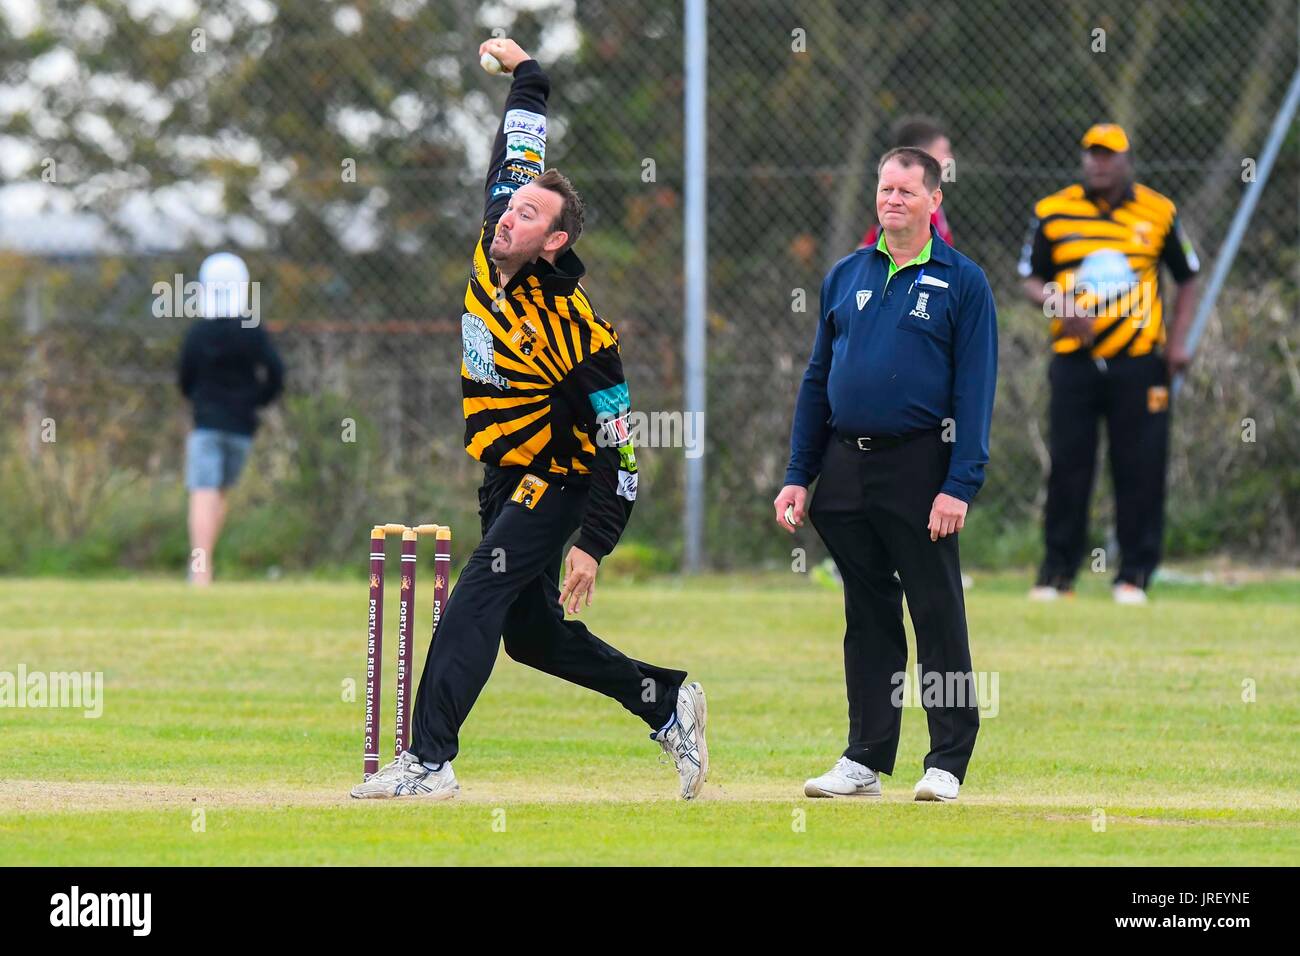 Easton, Portland, Dorset, UK.  4th August 2017.  Lashings captain Chris Schofield bowling during the Portland Red Triangle match v Lashings All Stars at the Reforne cricket ground at Easton in Dorset.  Photo Credit: Graham Hunt/Alamy Live News Stock Photo